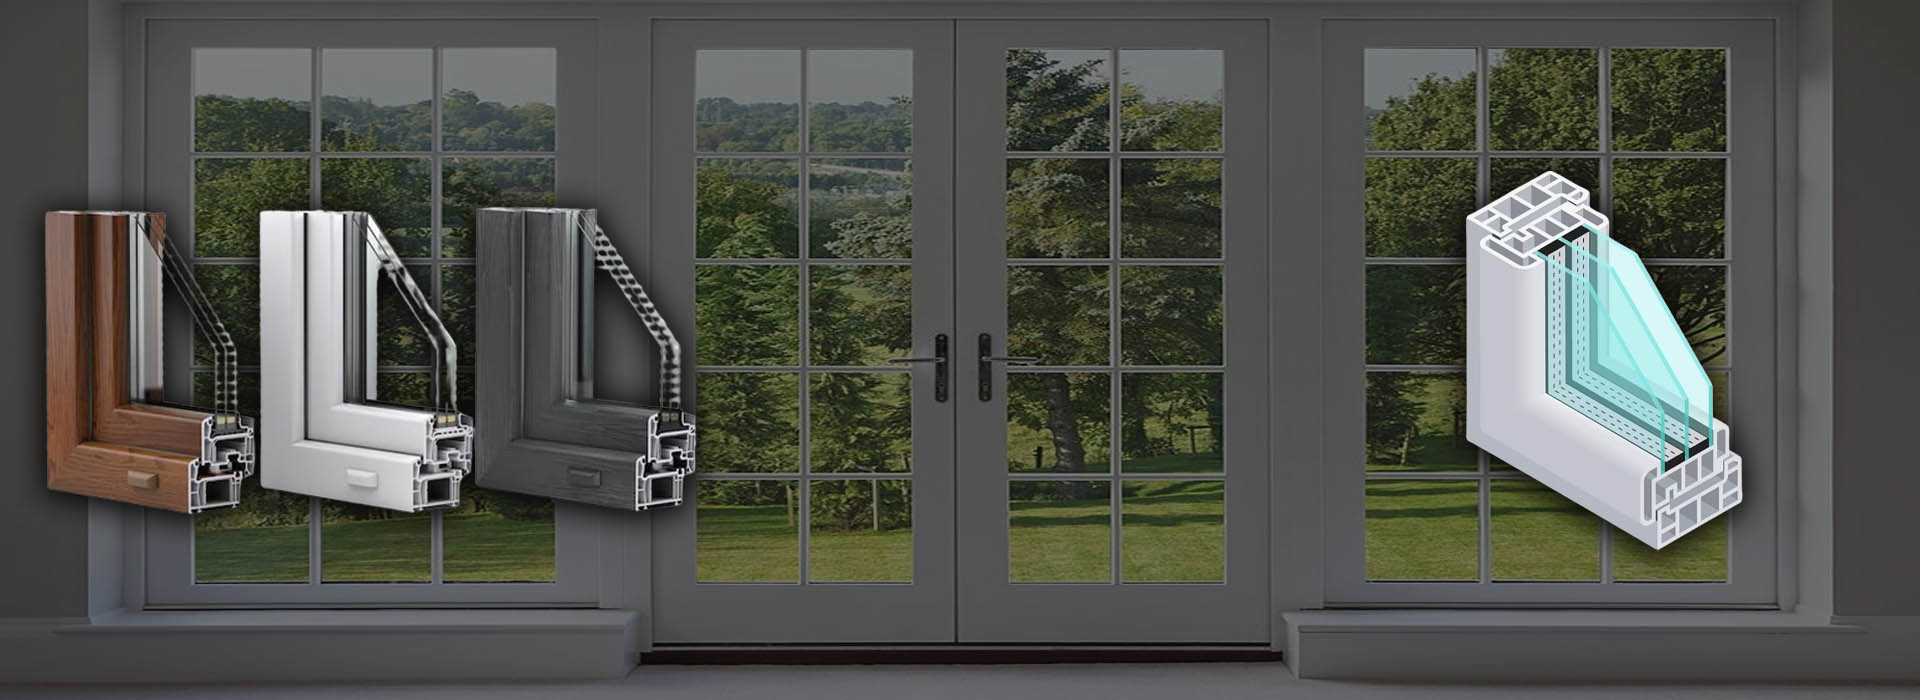 PSP Dynamic Limited Door & Window Division